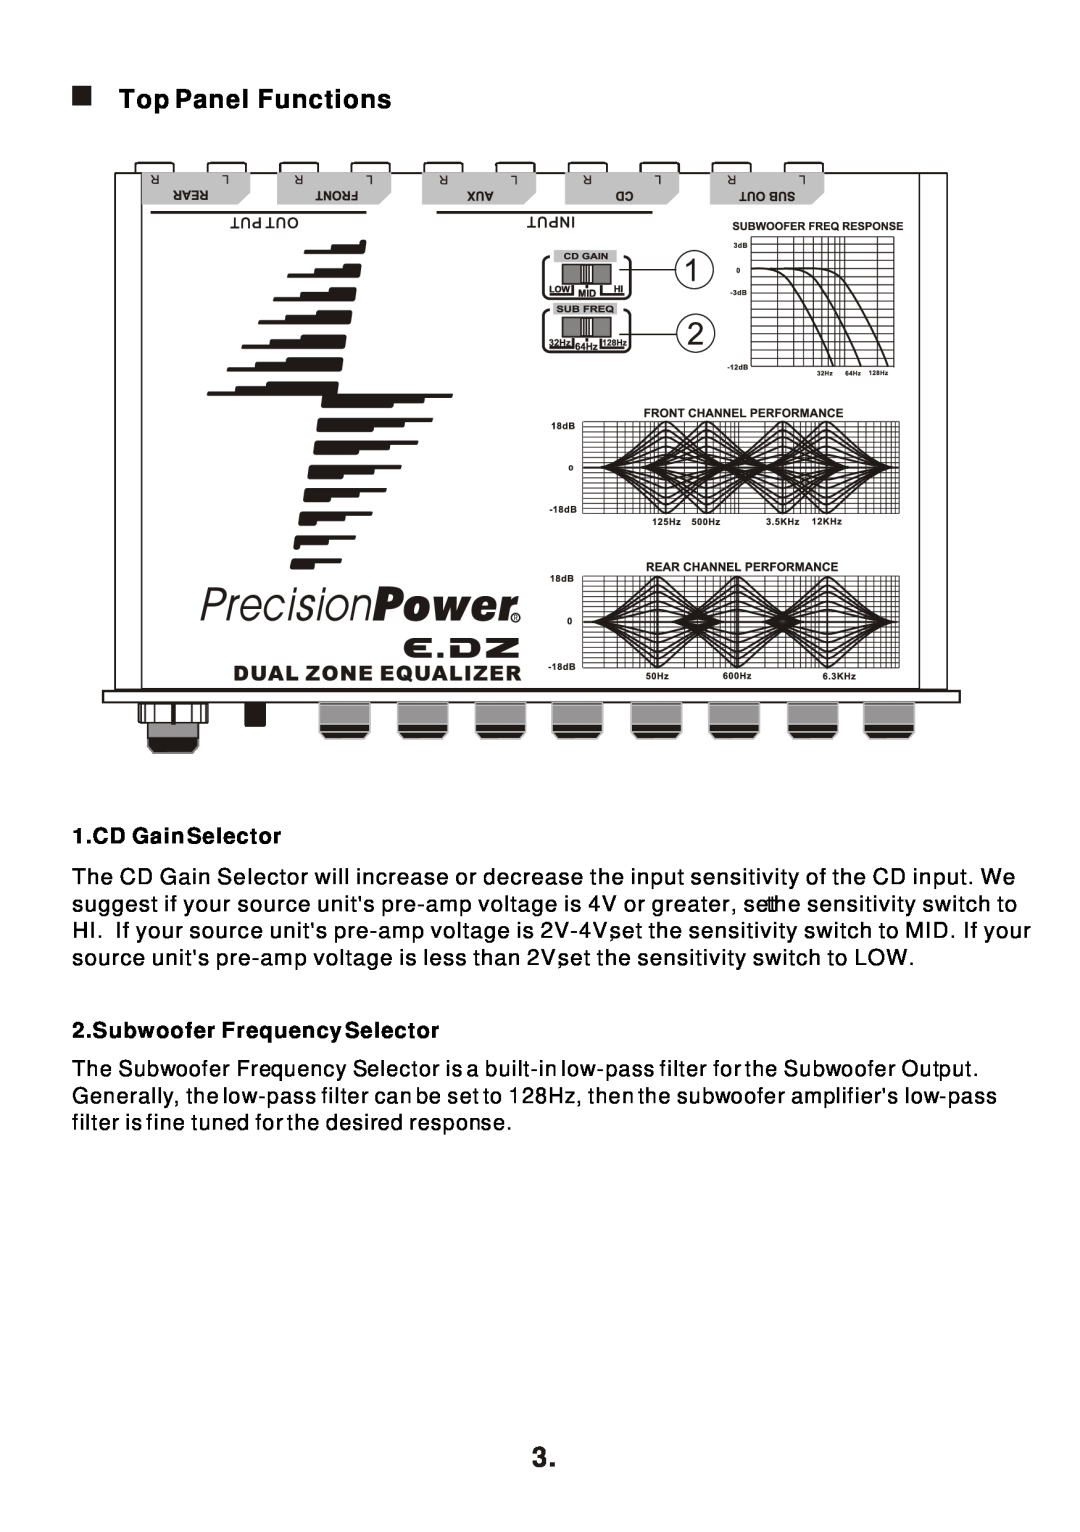 Precision Power E.DZ owner manual Top Panel Functions, CD Gain Selector, Subwoofer Frequency Selector 